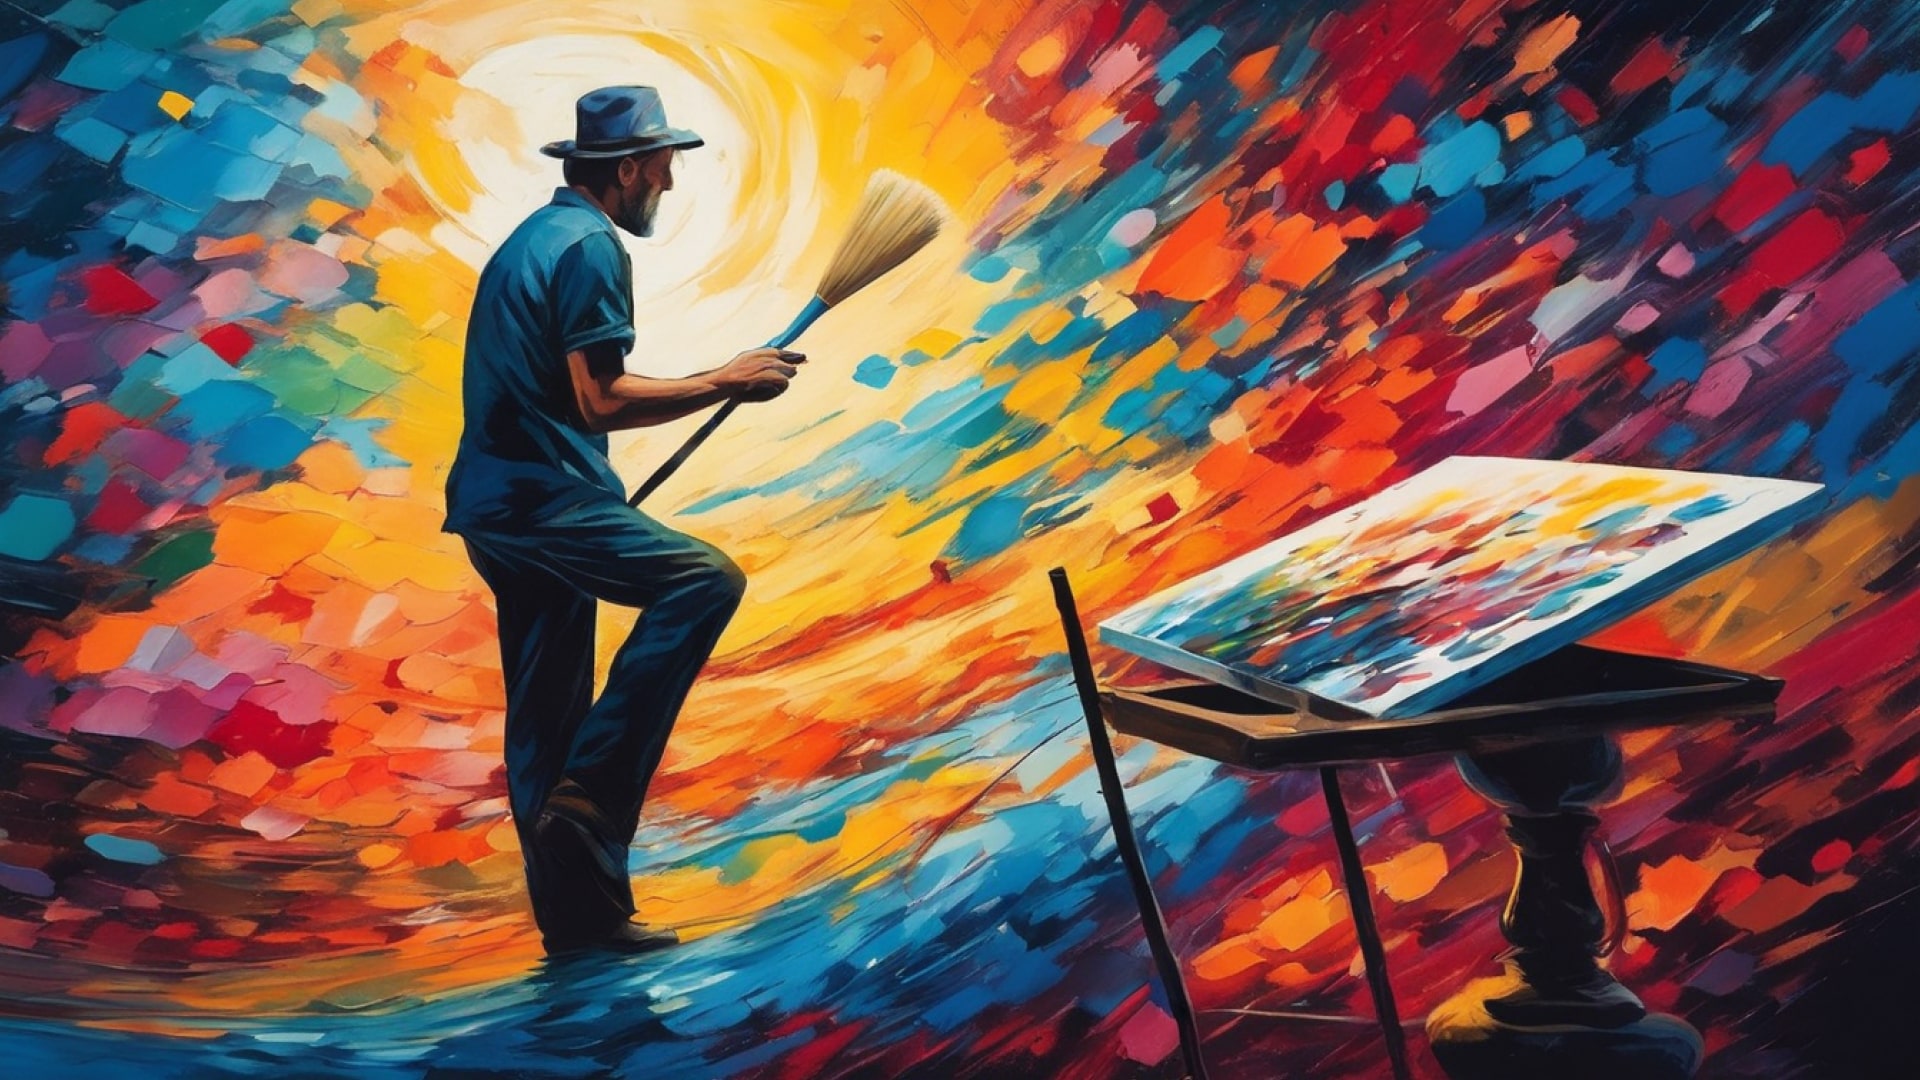 An illustration showing an artist with a paintbrush extending the canvas infinitely